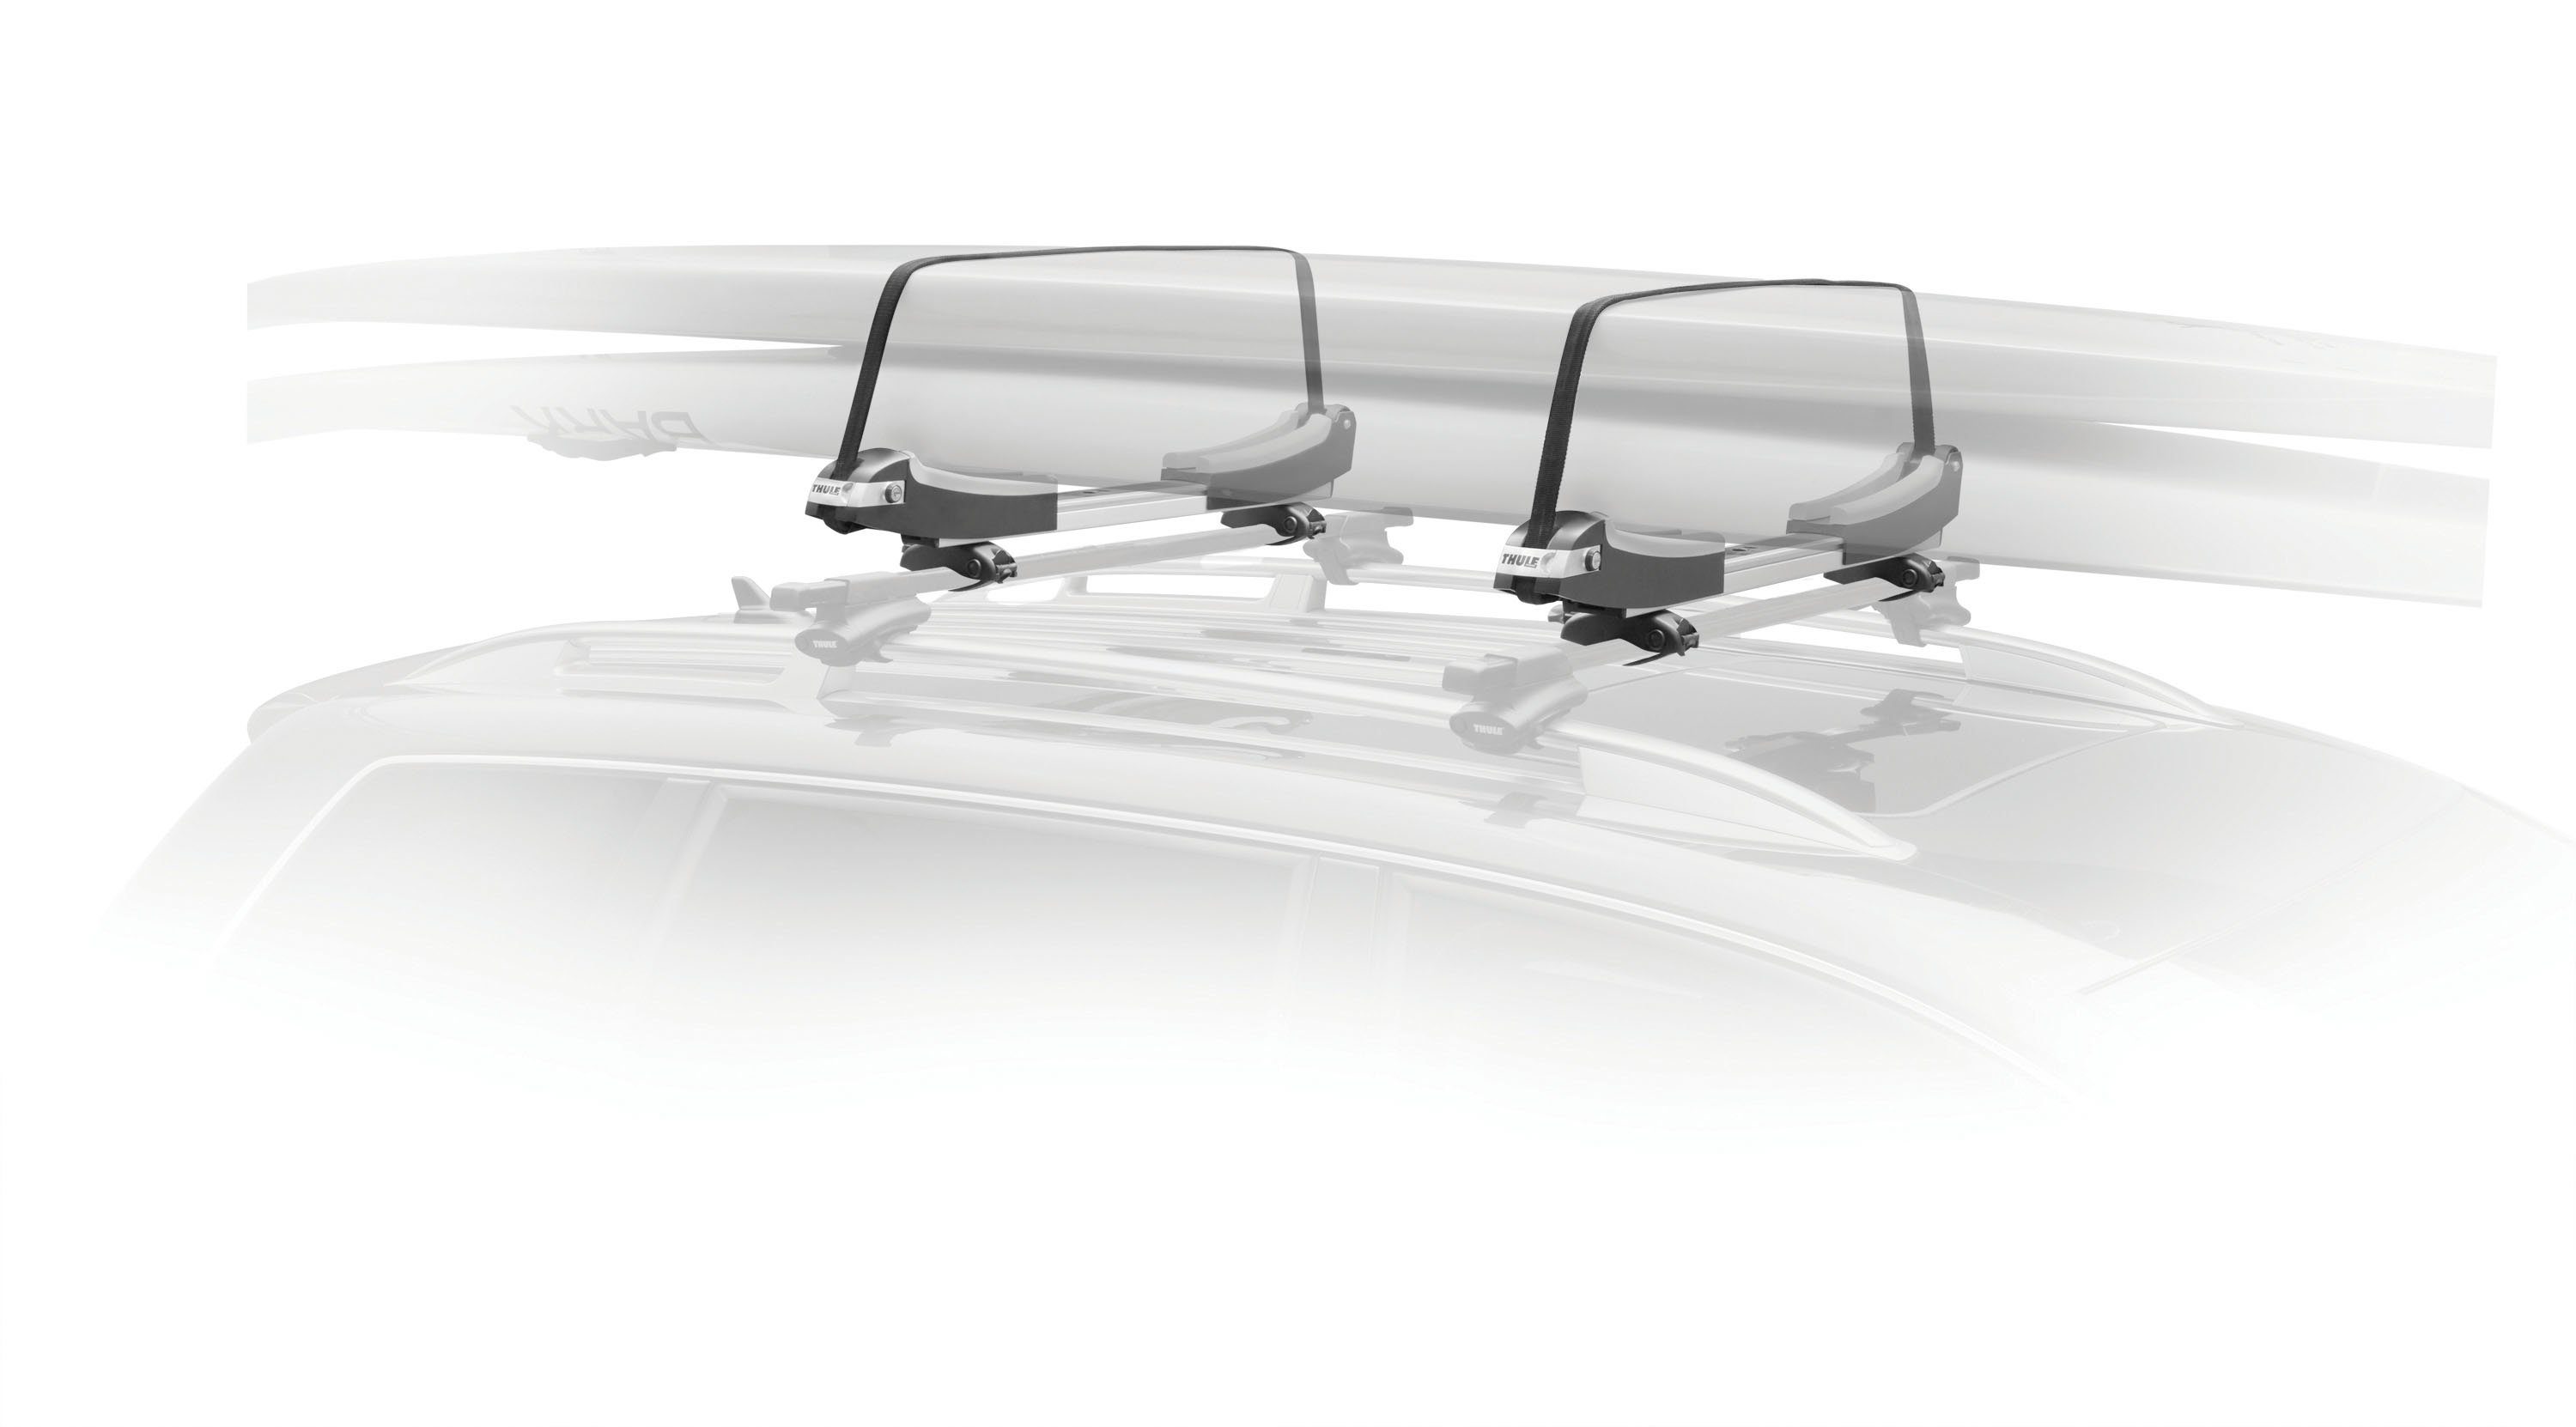 Thule Dachträger SUP für XT, SUP-Boards Taxi